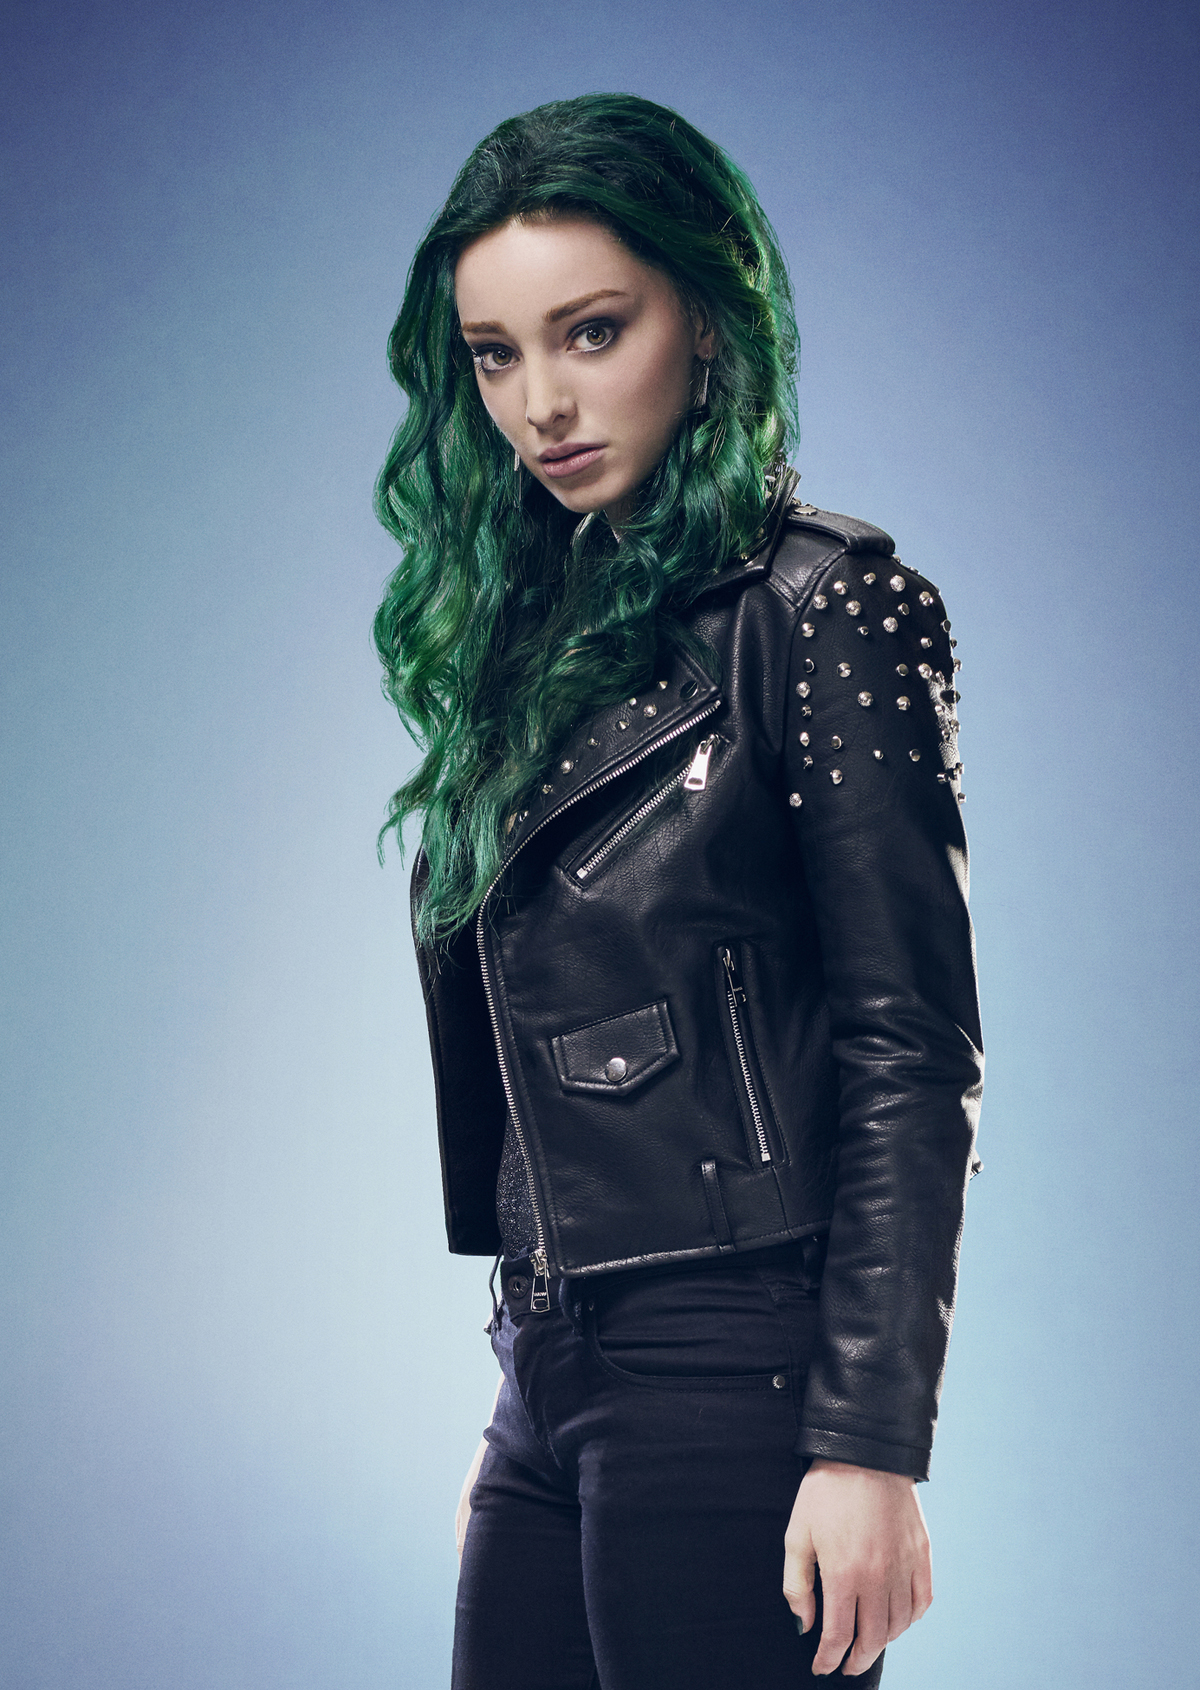 Emma dumont movies and tv shows